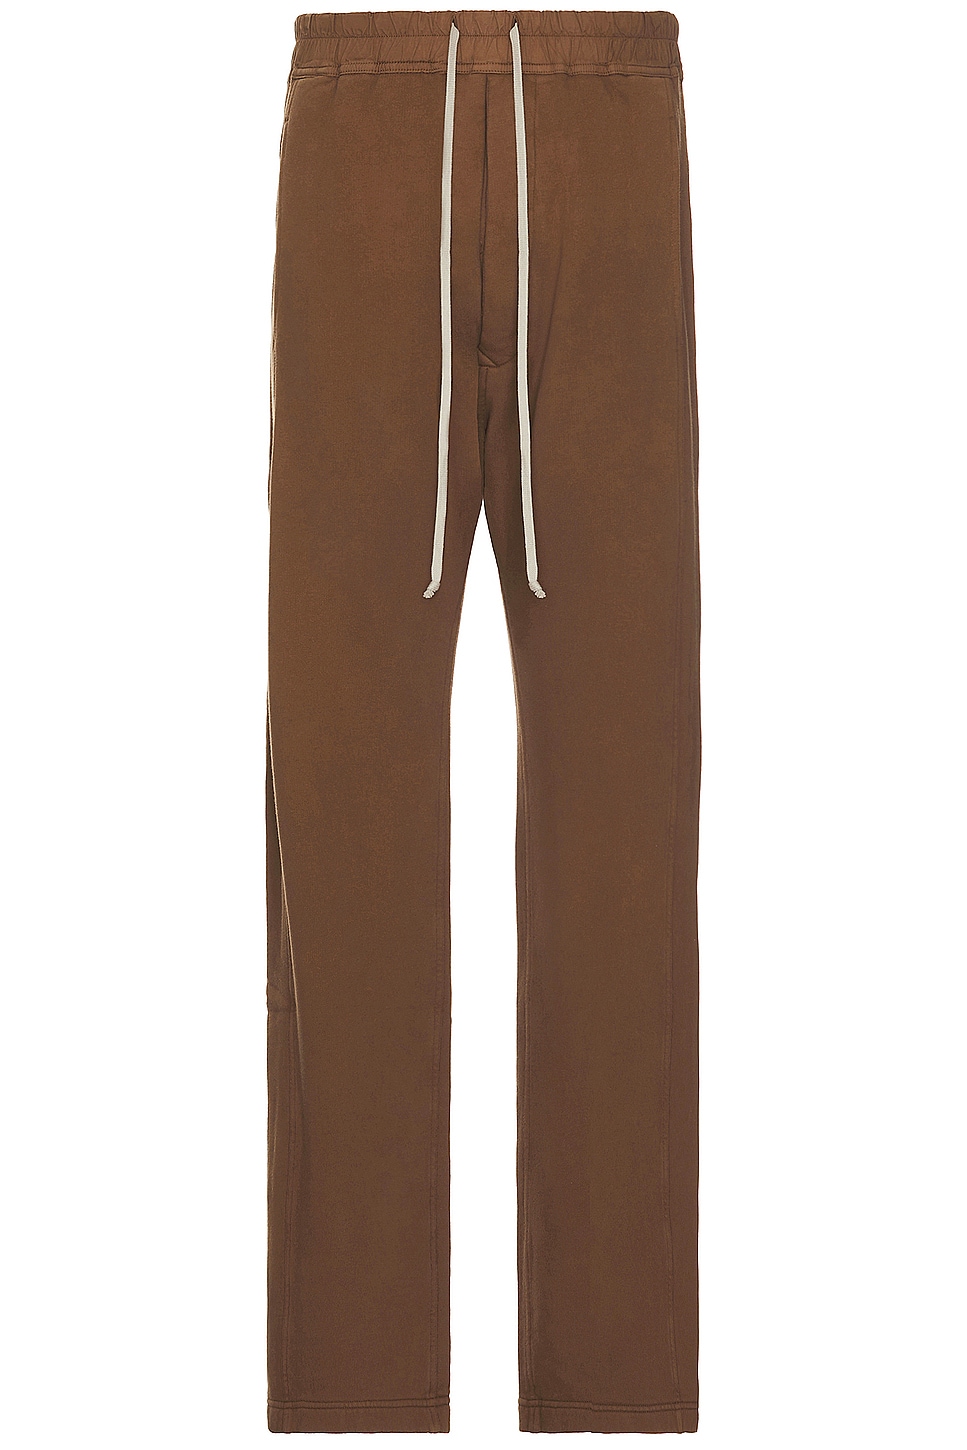 Image 1 of DRKSHDW by Rick Owens Pusher Pant in Khaki